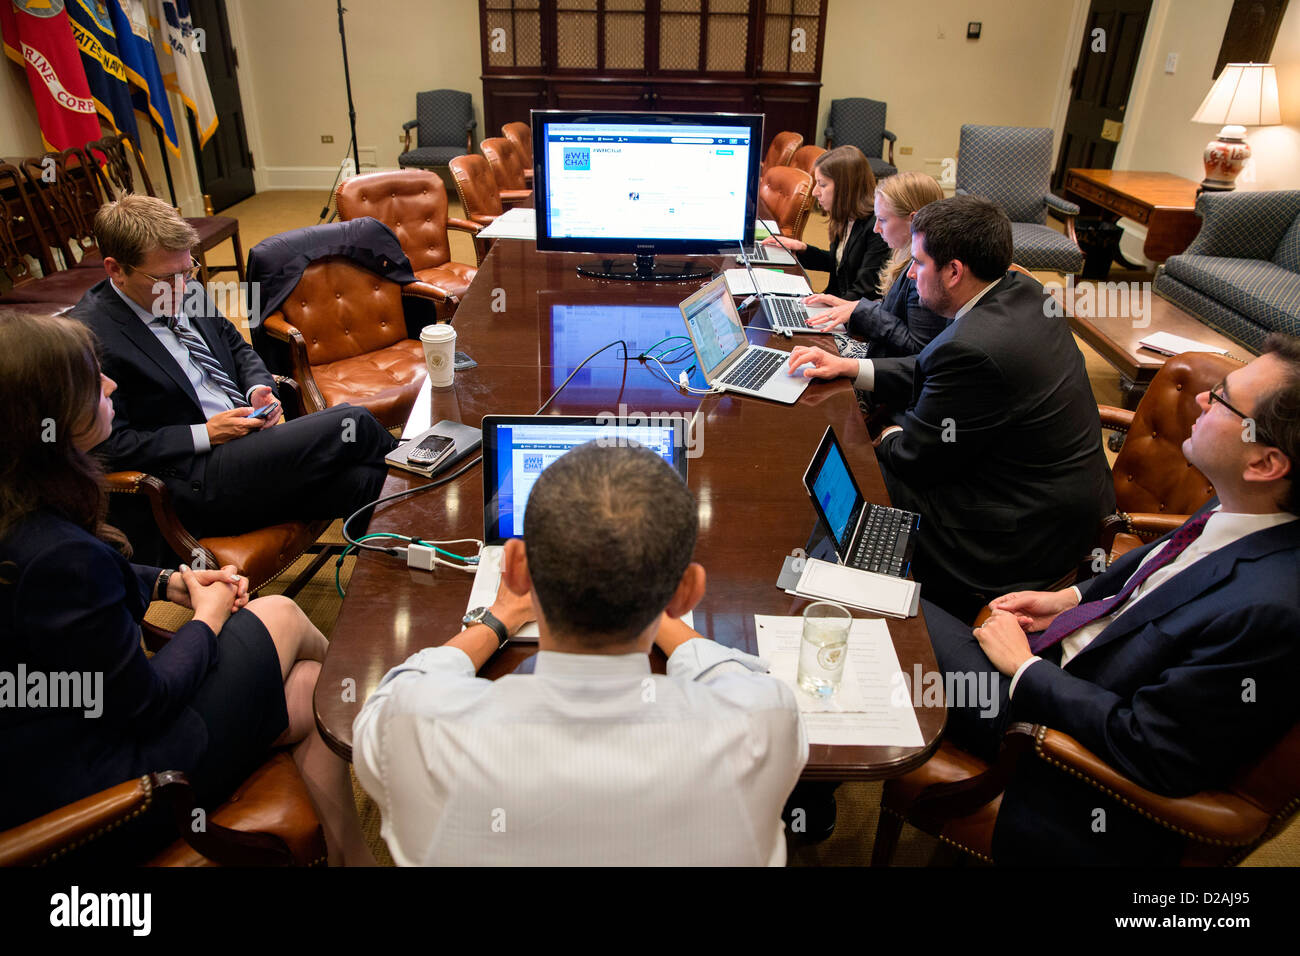 US President Barack Obama participates in a live Twitter question and answer session in the Roosevelt Room of the White House December 3, 2012 in Washington, DC. Stock Photo